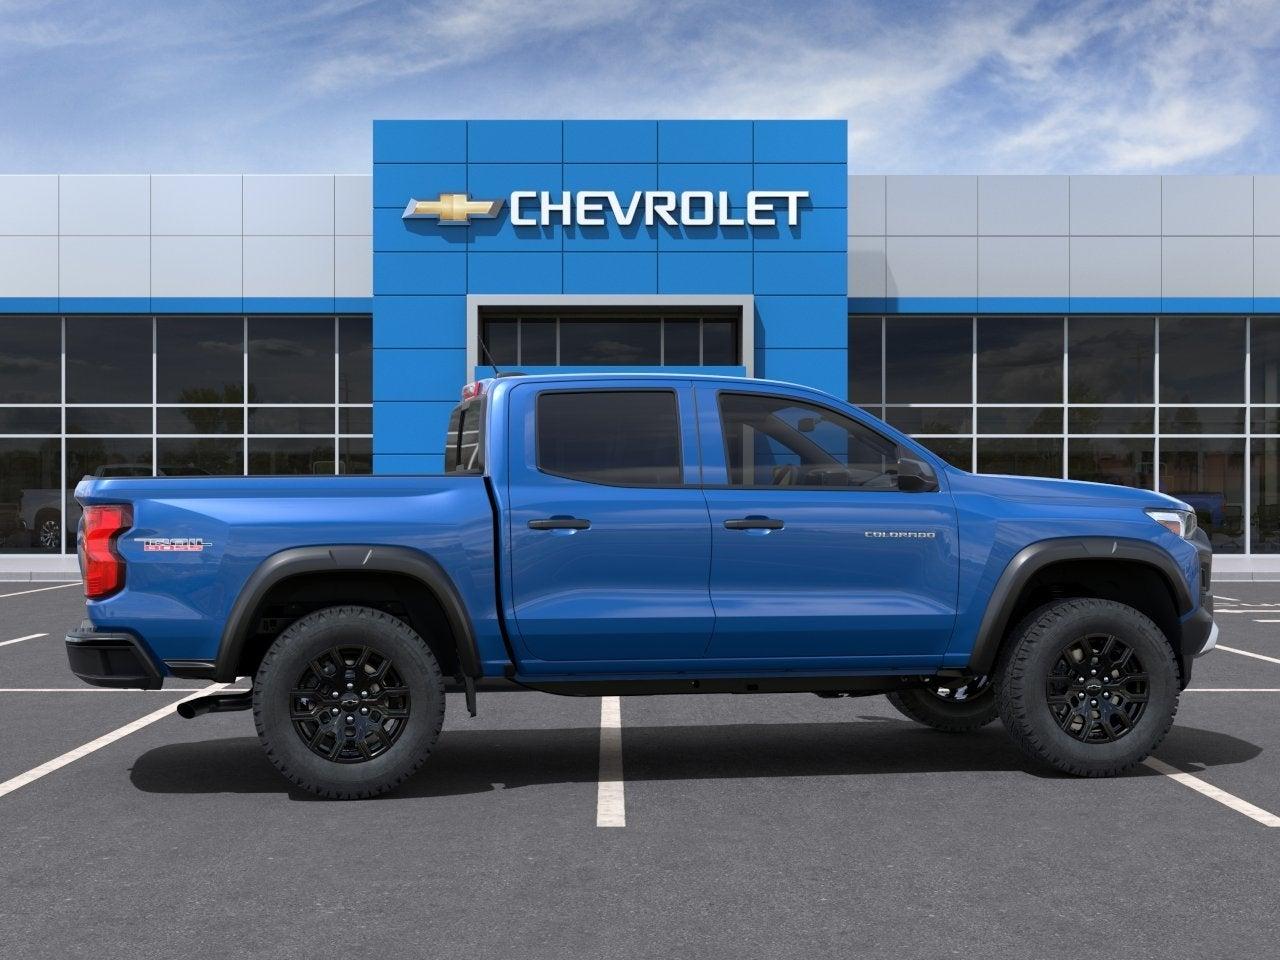 2023 Chevrolet Colorado Photo in Wooster, OH 44691